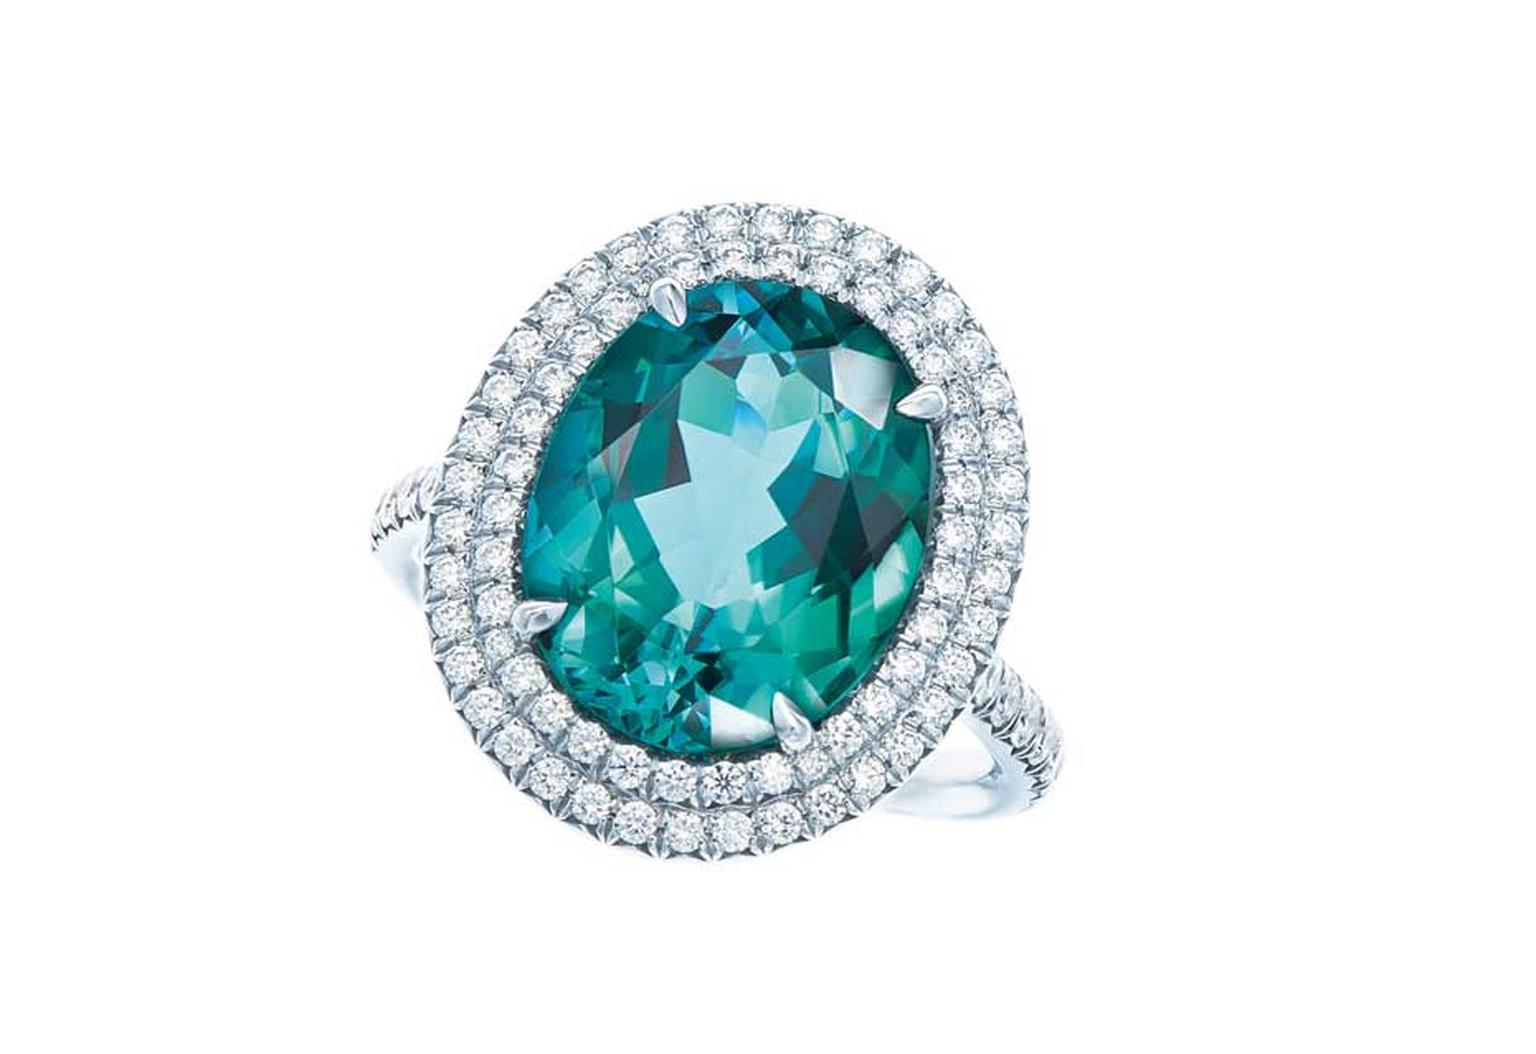 Tiffany Soleste ring in platinum with diamonds and oval-cut green tourmaline.